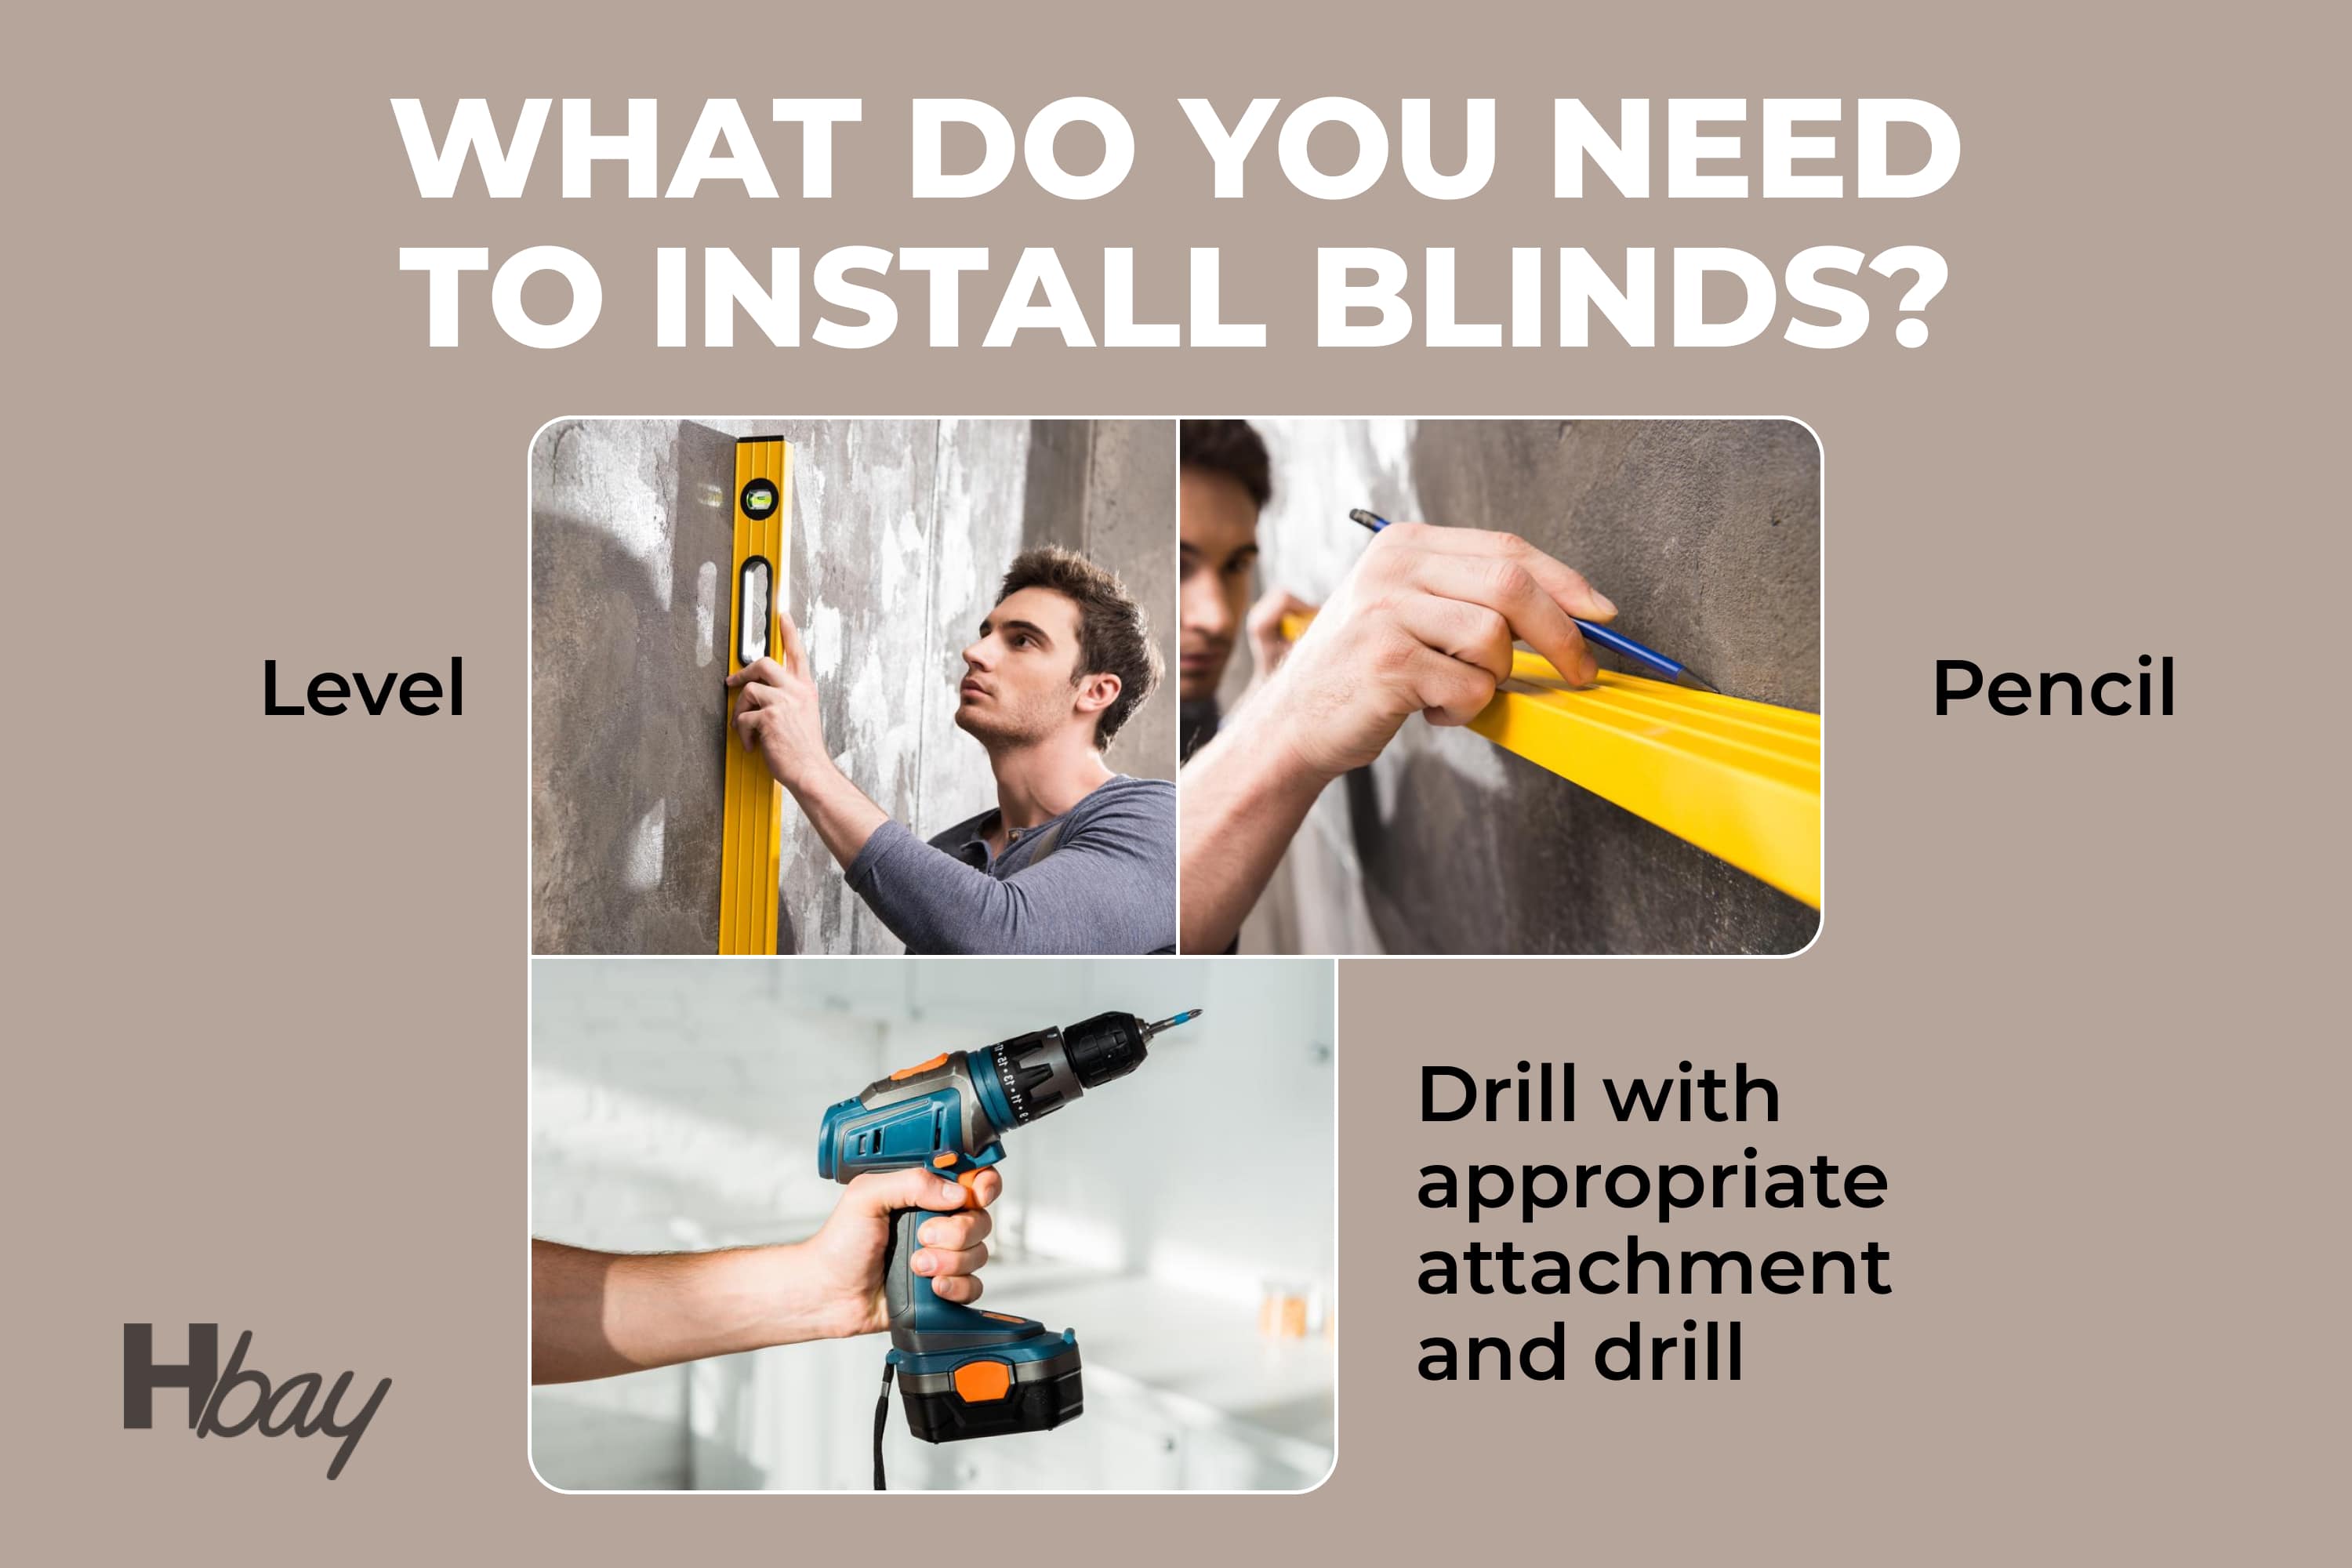 What do you need to install blinds